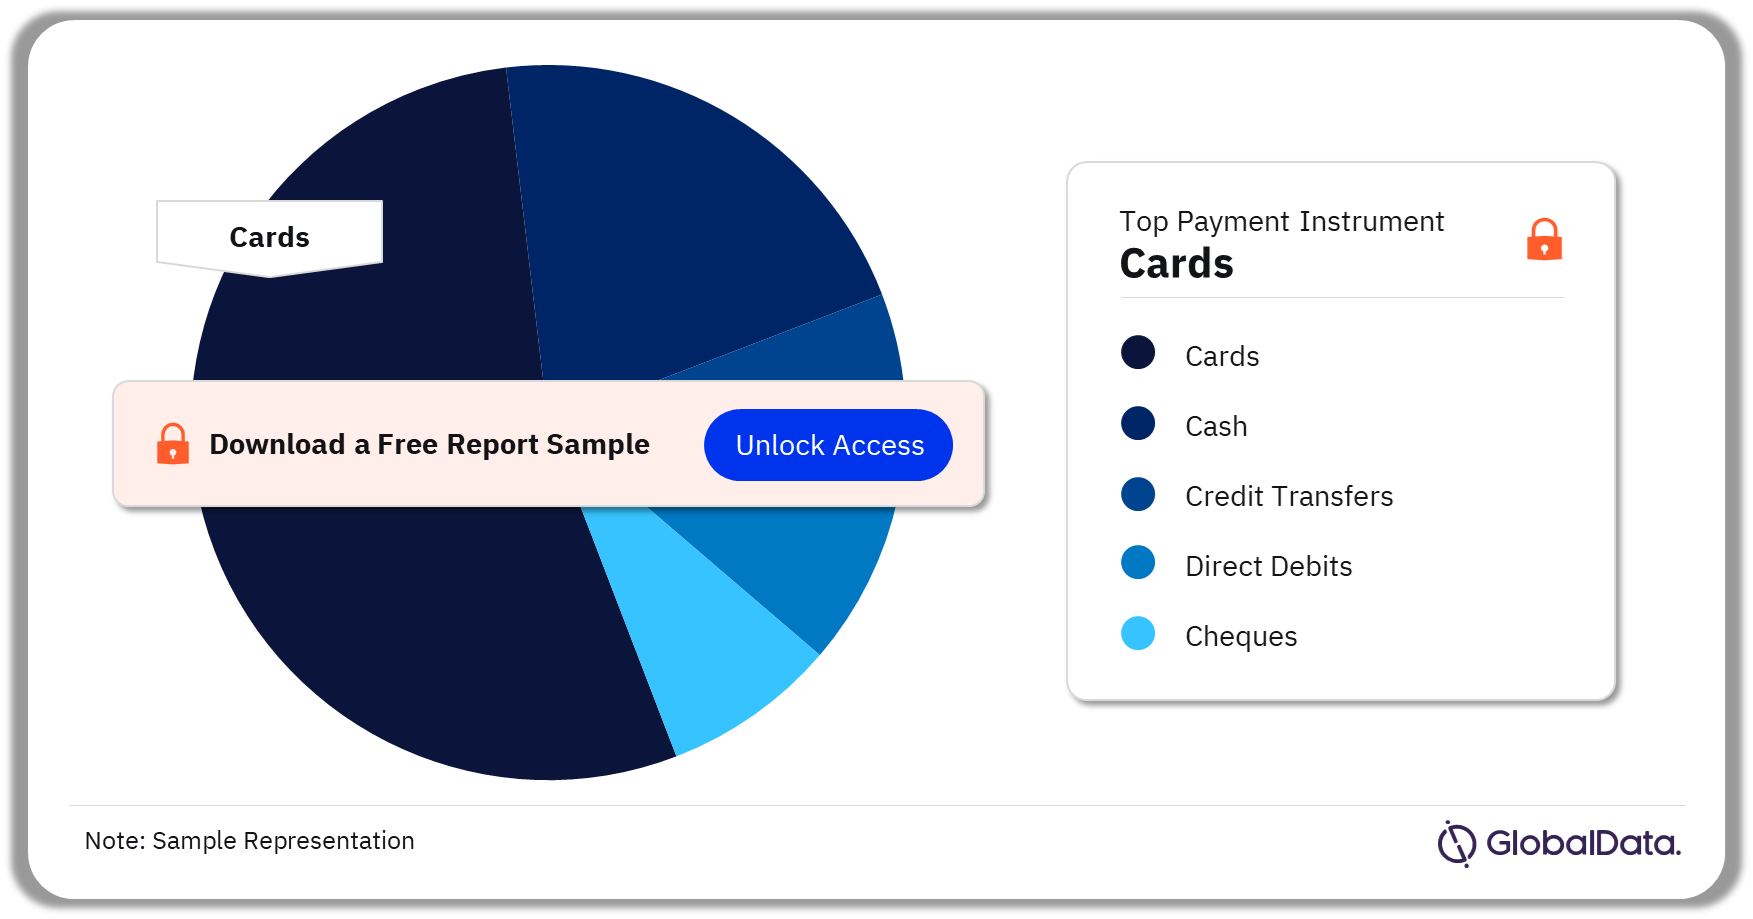 Saudi Arabia Cards and Payments Market Analysis by Payment Instruments, 2023 (%)